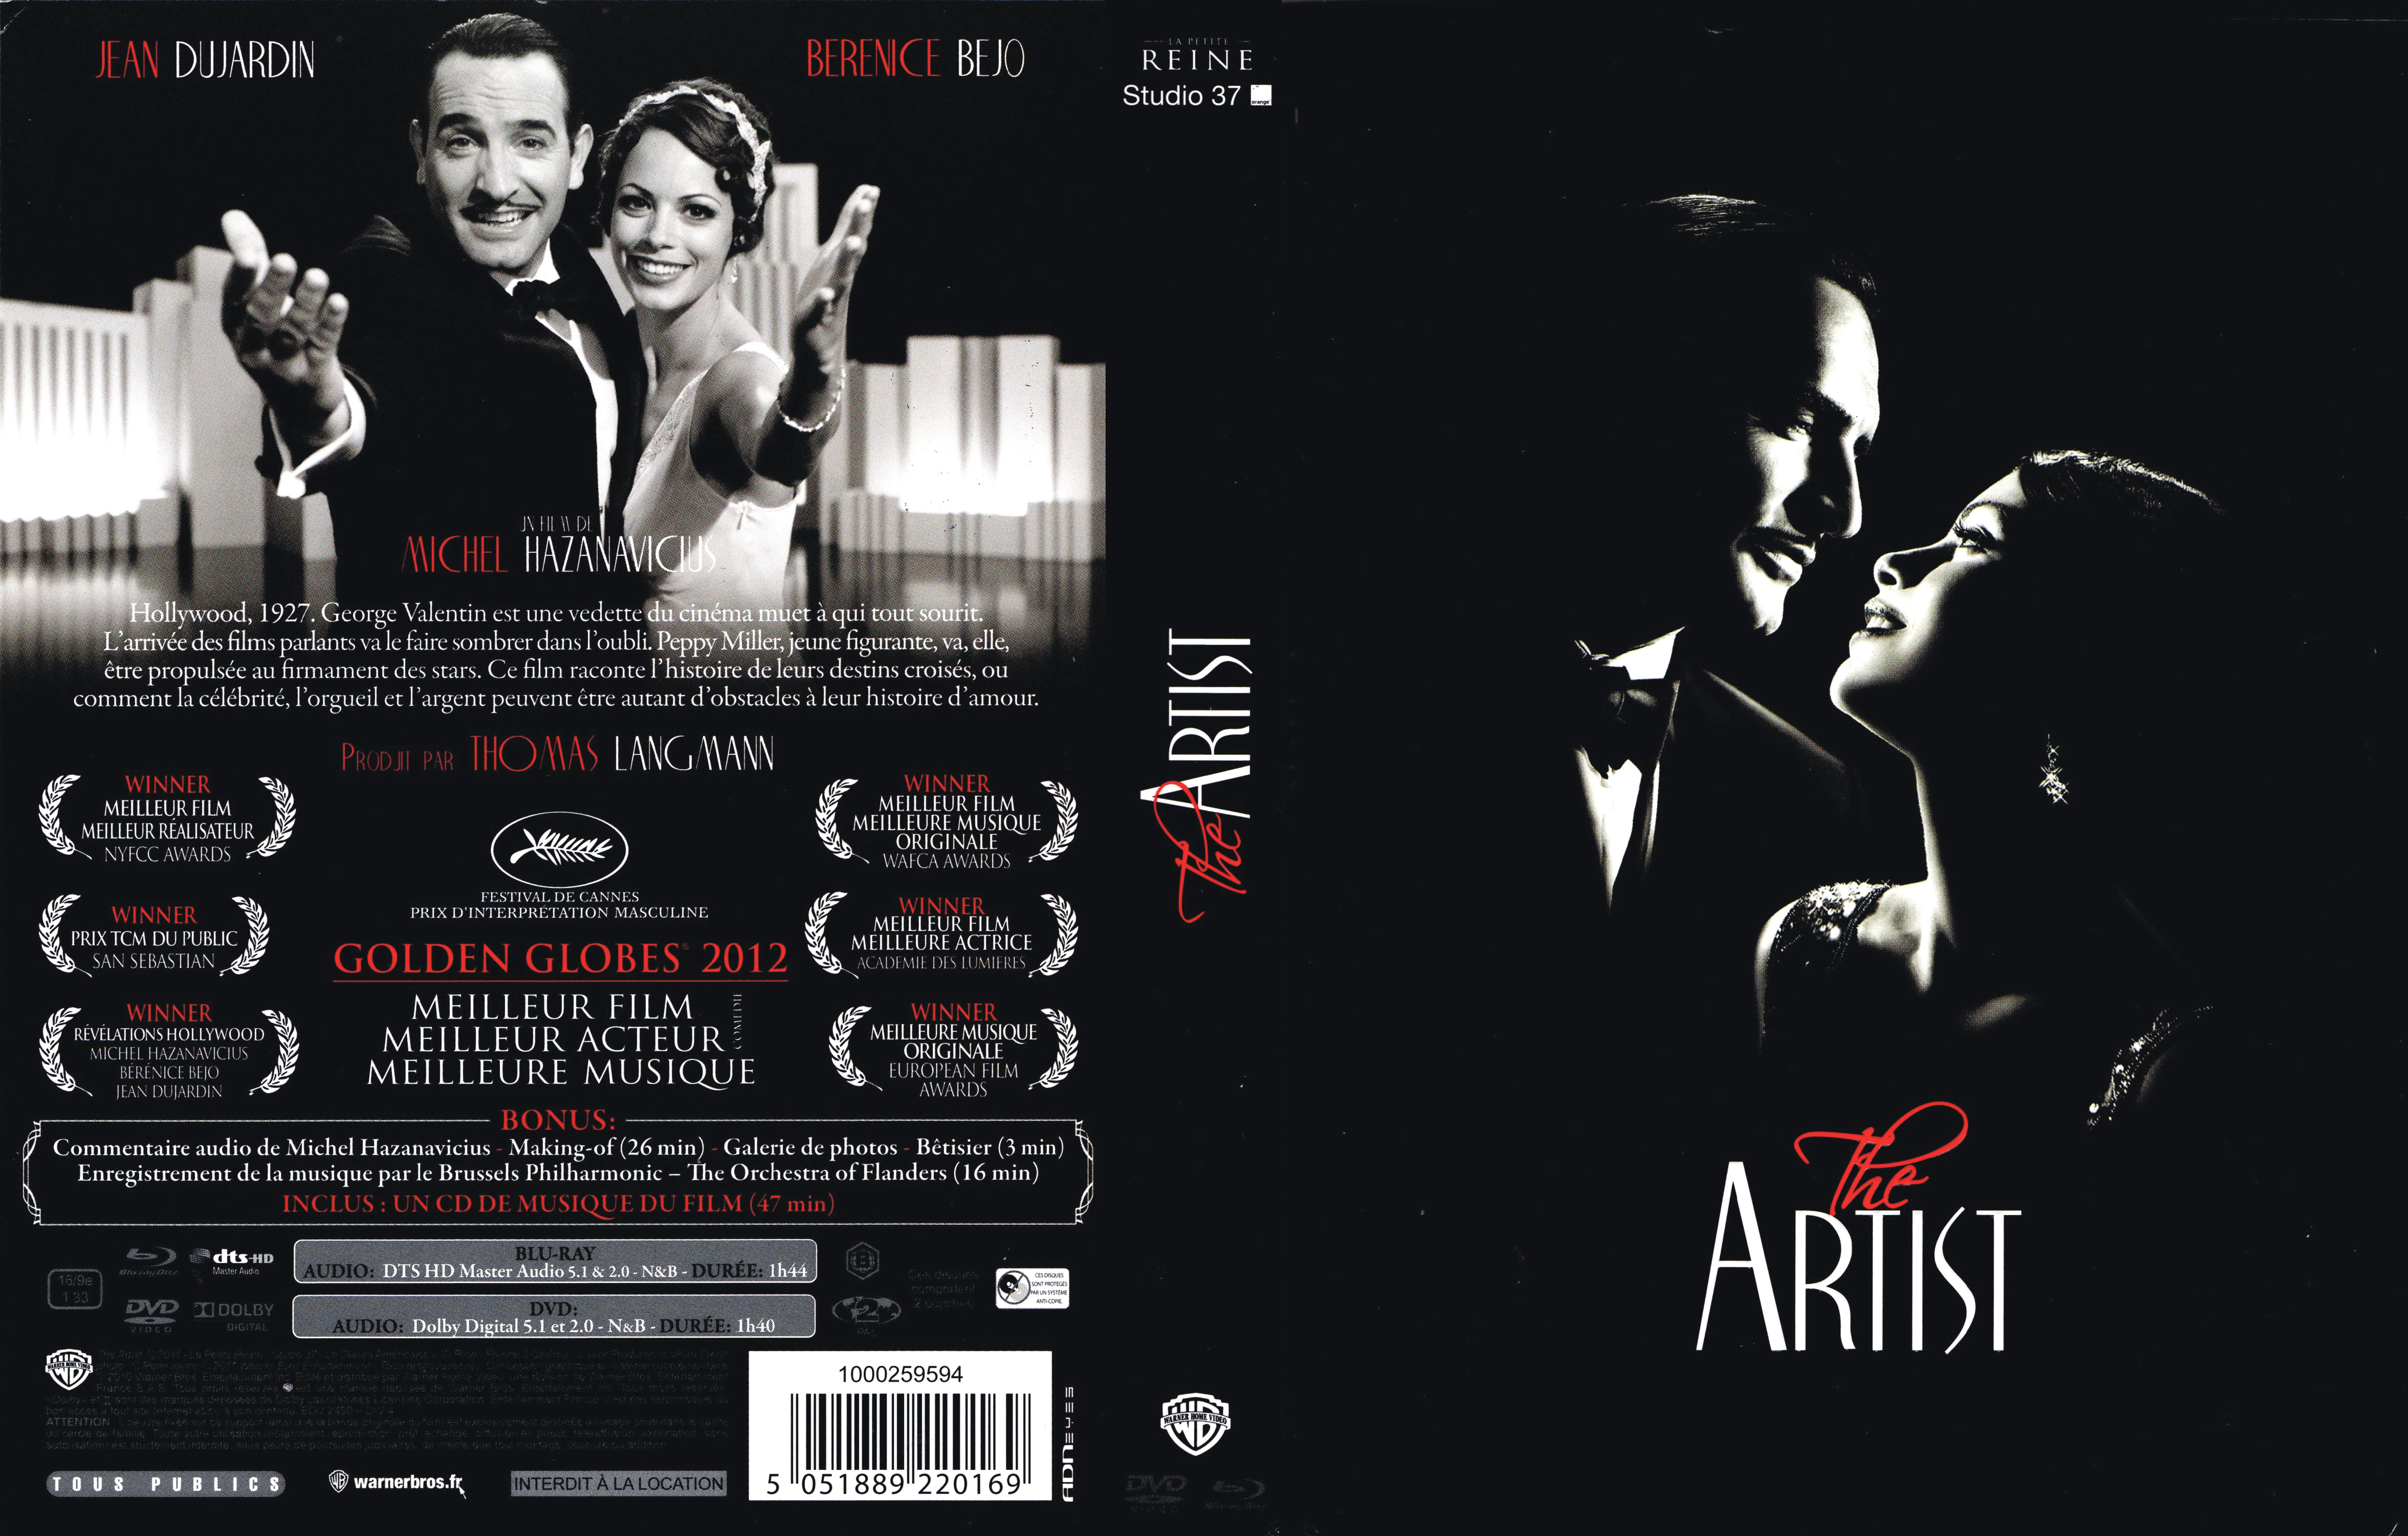 Jaquette DVD The Artist (BLU-RAY) v2